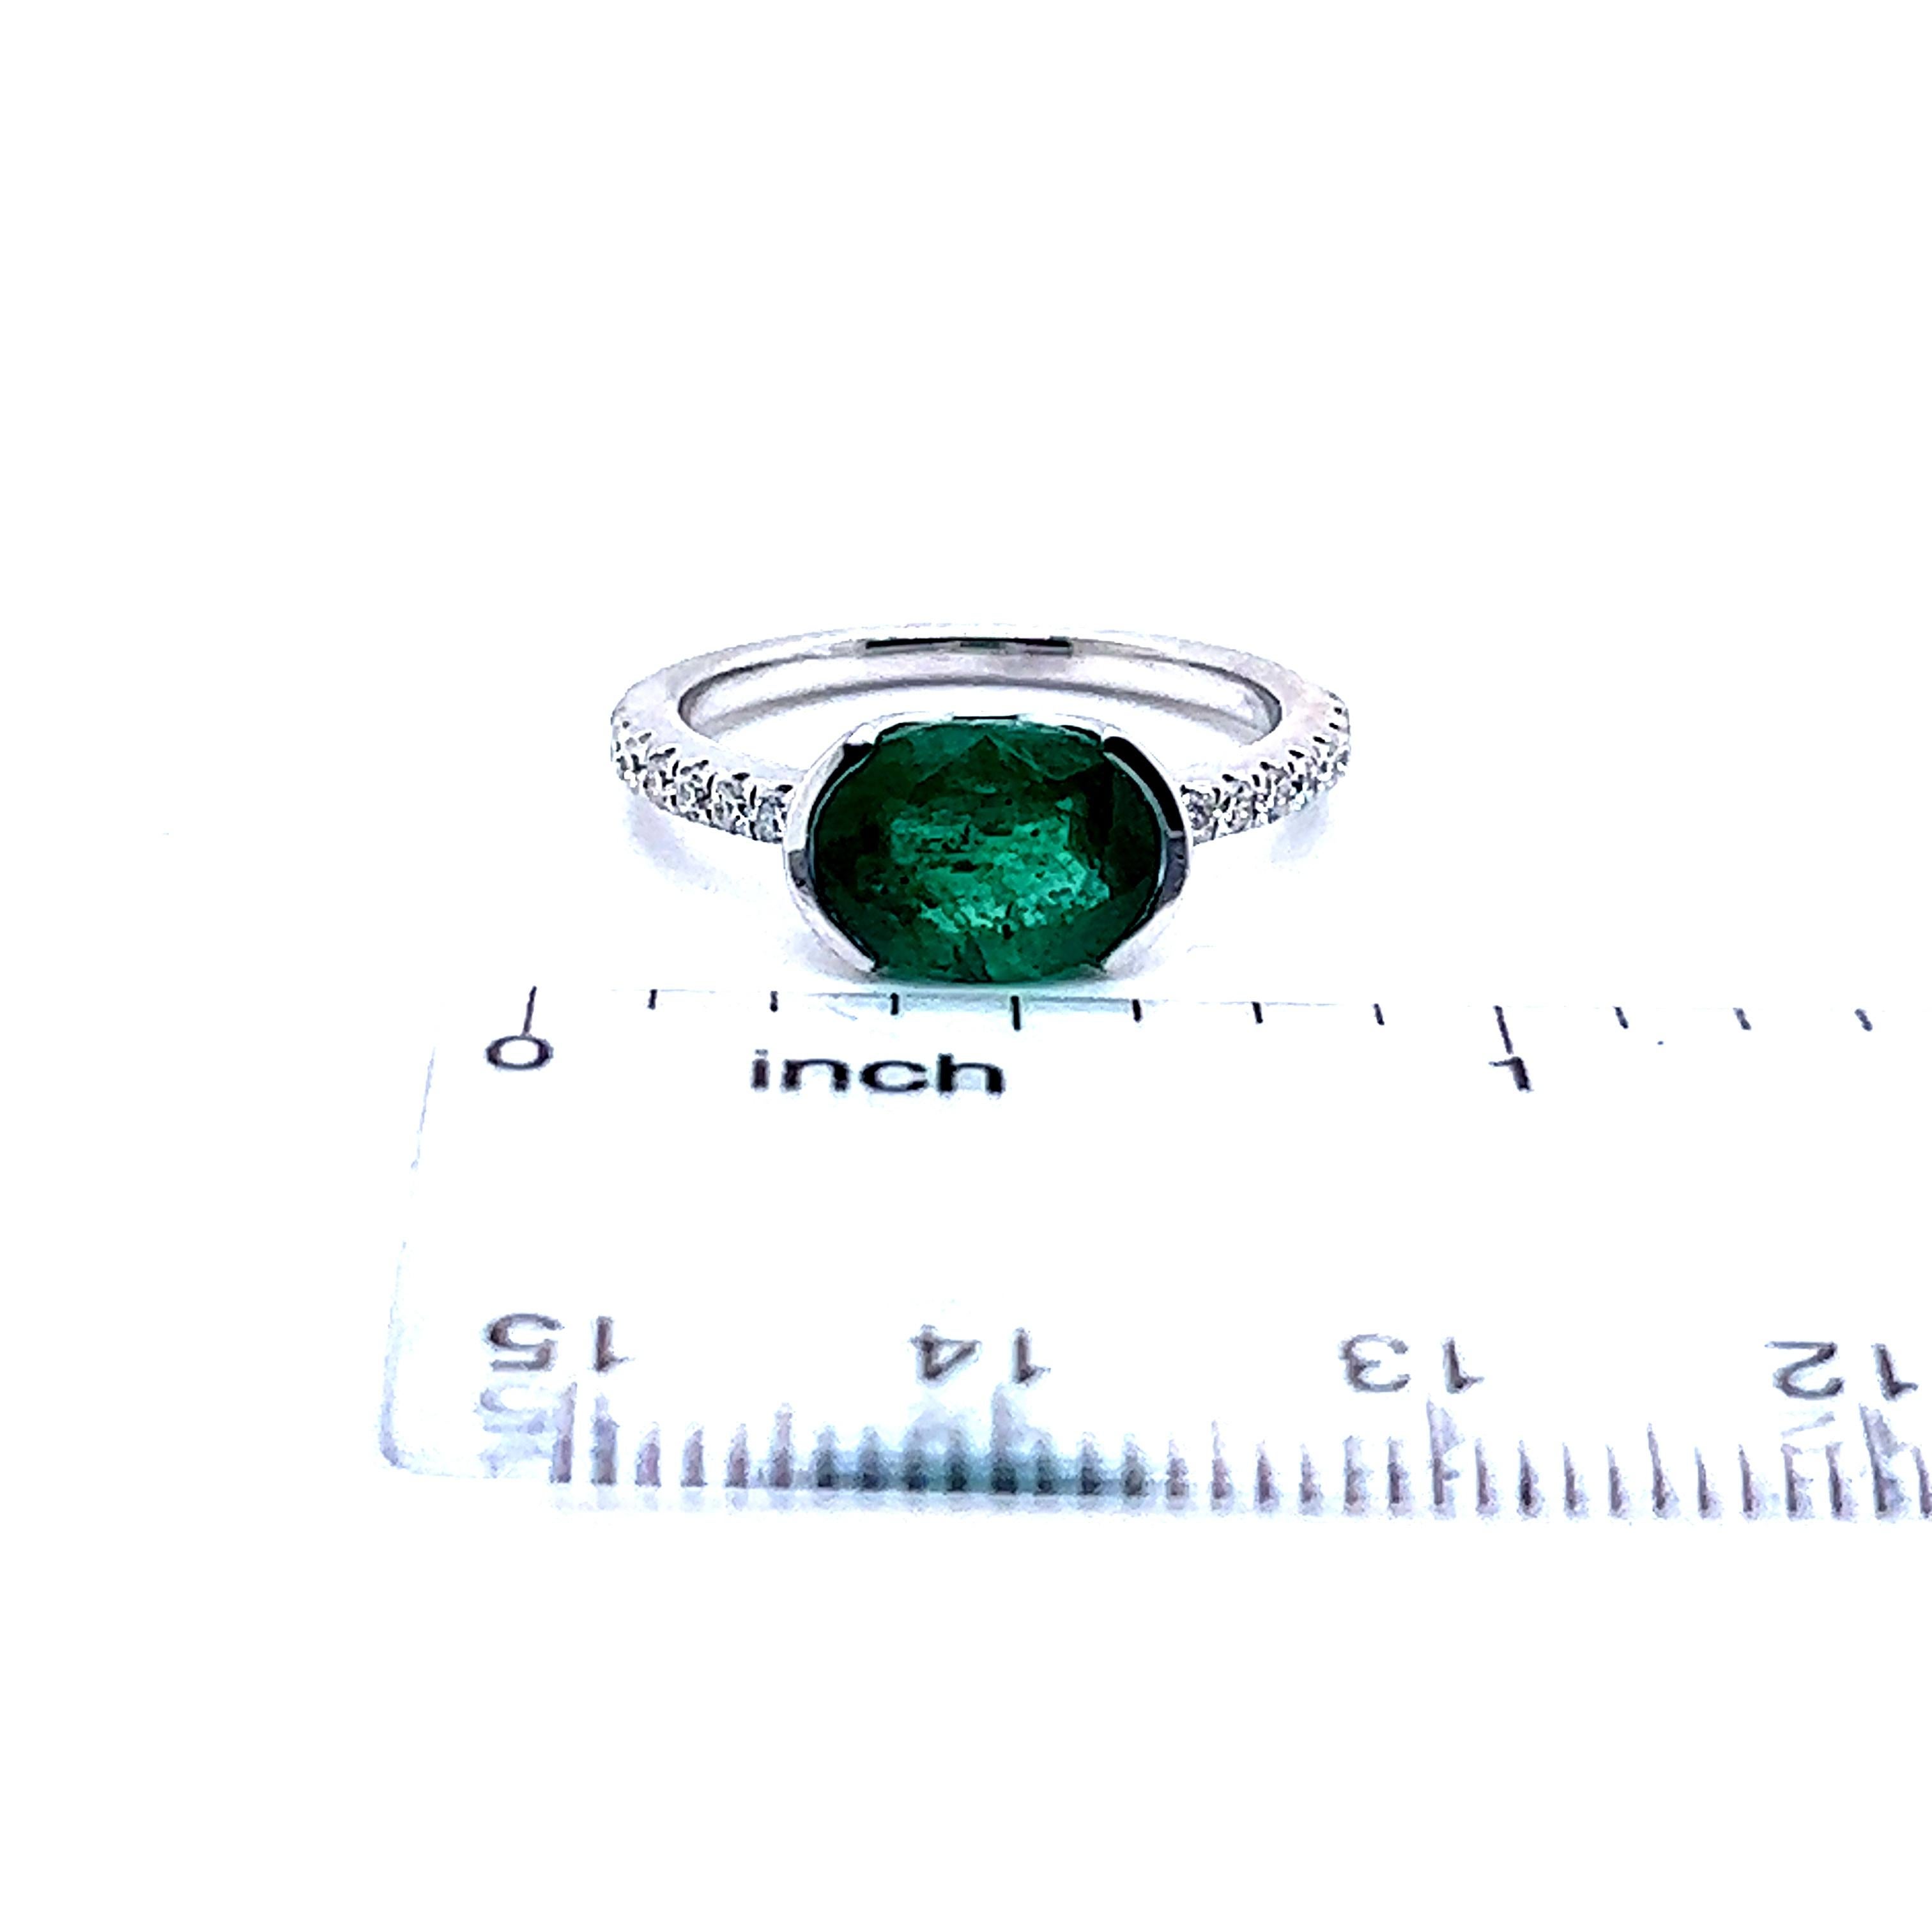 Natural Emerald Diamond Ring 6.5 14k W Gold 2.33 TCW Certified For Sale 7